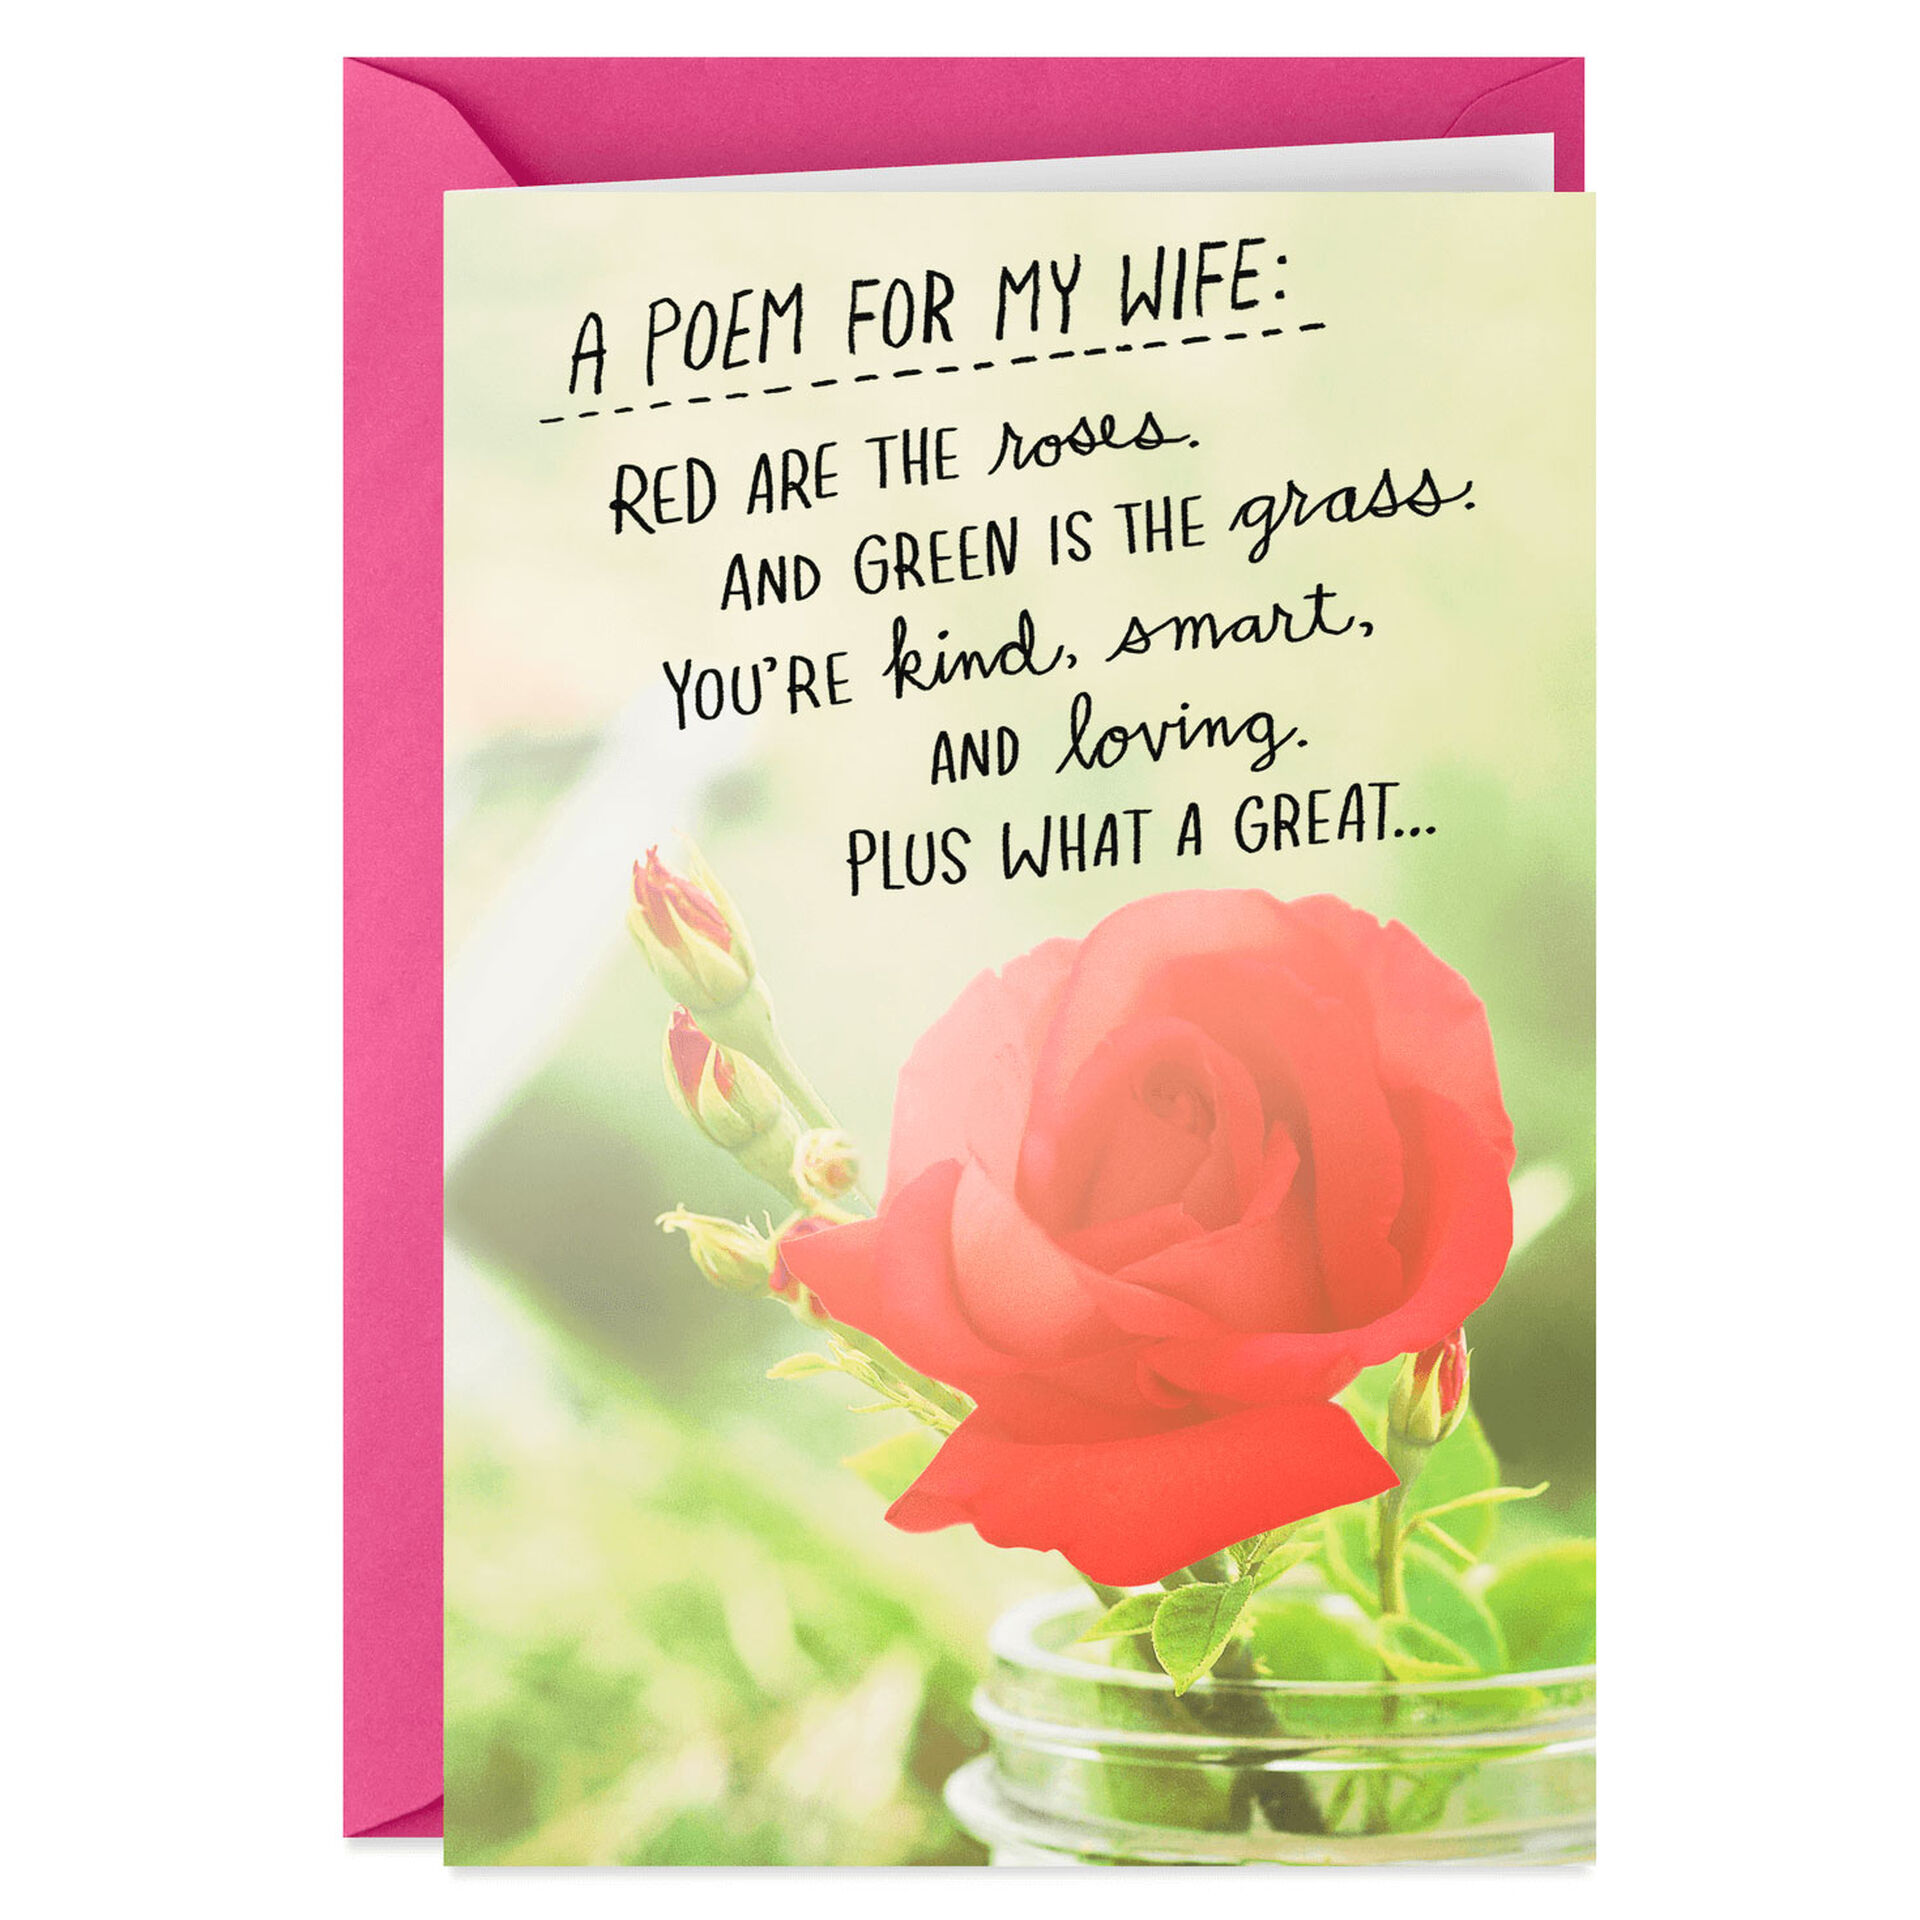 A Bad Poem for My Wife Funny Mother's Day Card - Greeting Cards - Hallmark